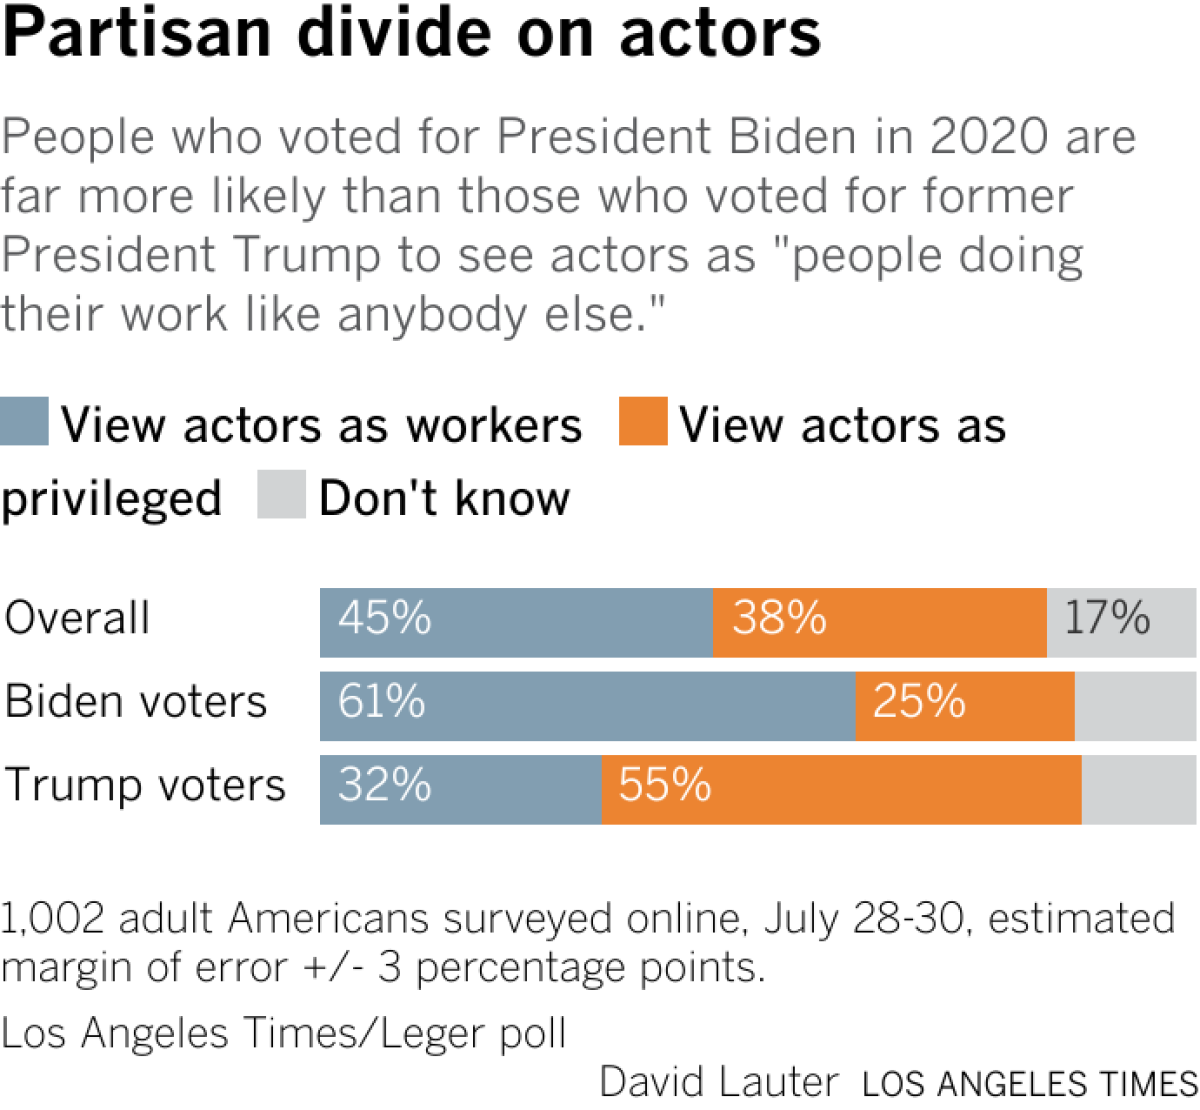 People who voted for President Biden in 2020 are far more likely than those who voted for former President Trump to see actors as "people doing their work like anybody else."